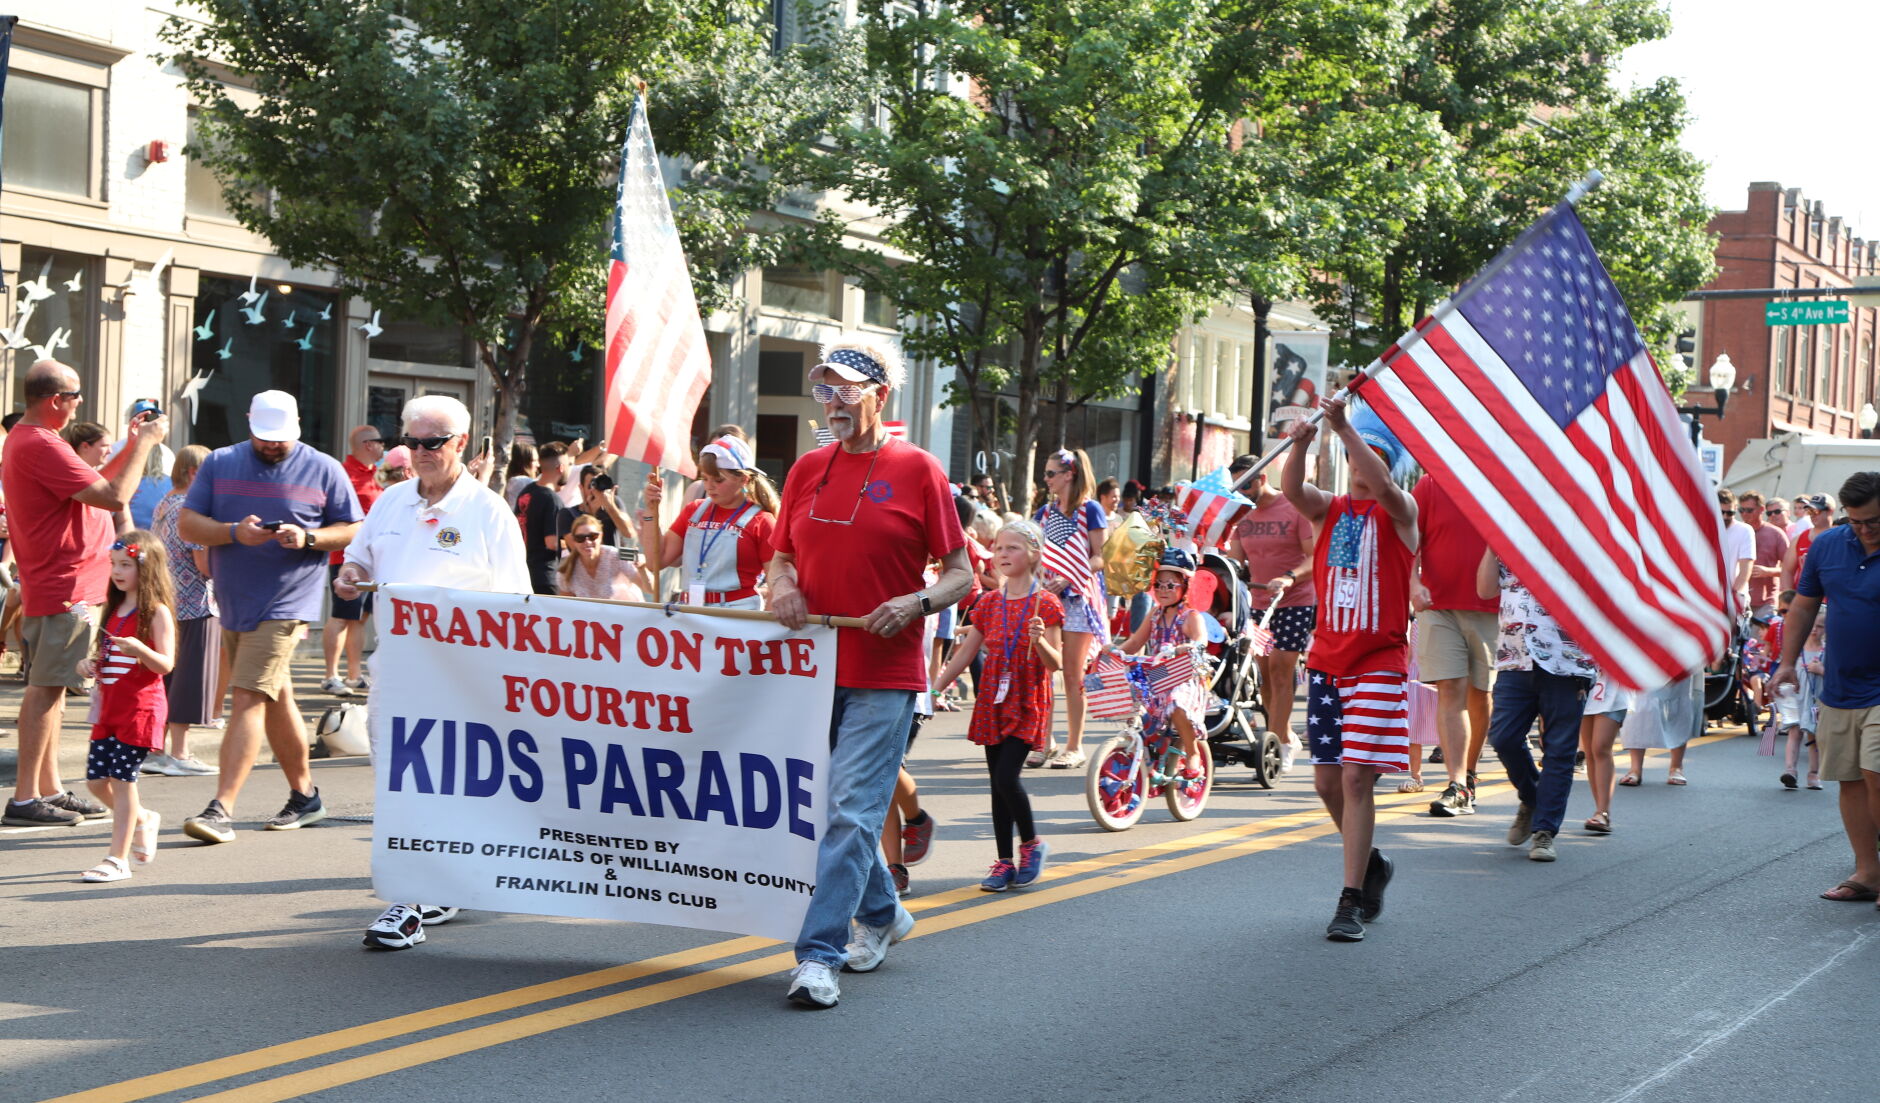 Franklin on the Fourth to kick off at 10 a.m. downtown Entertainment